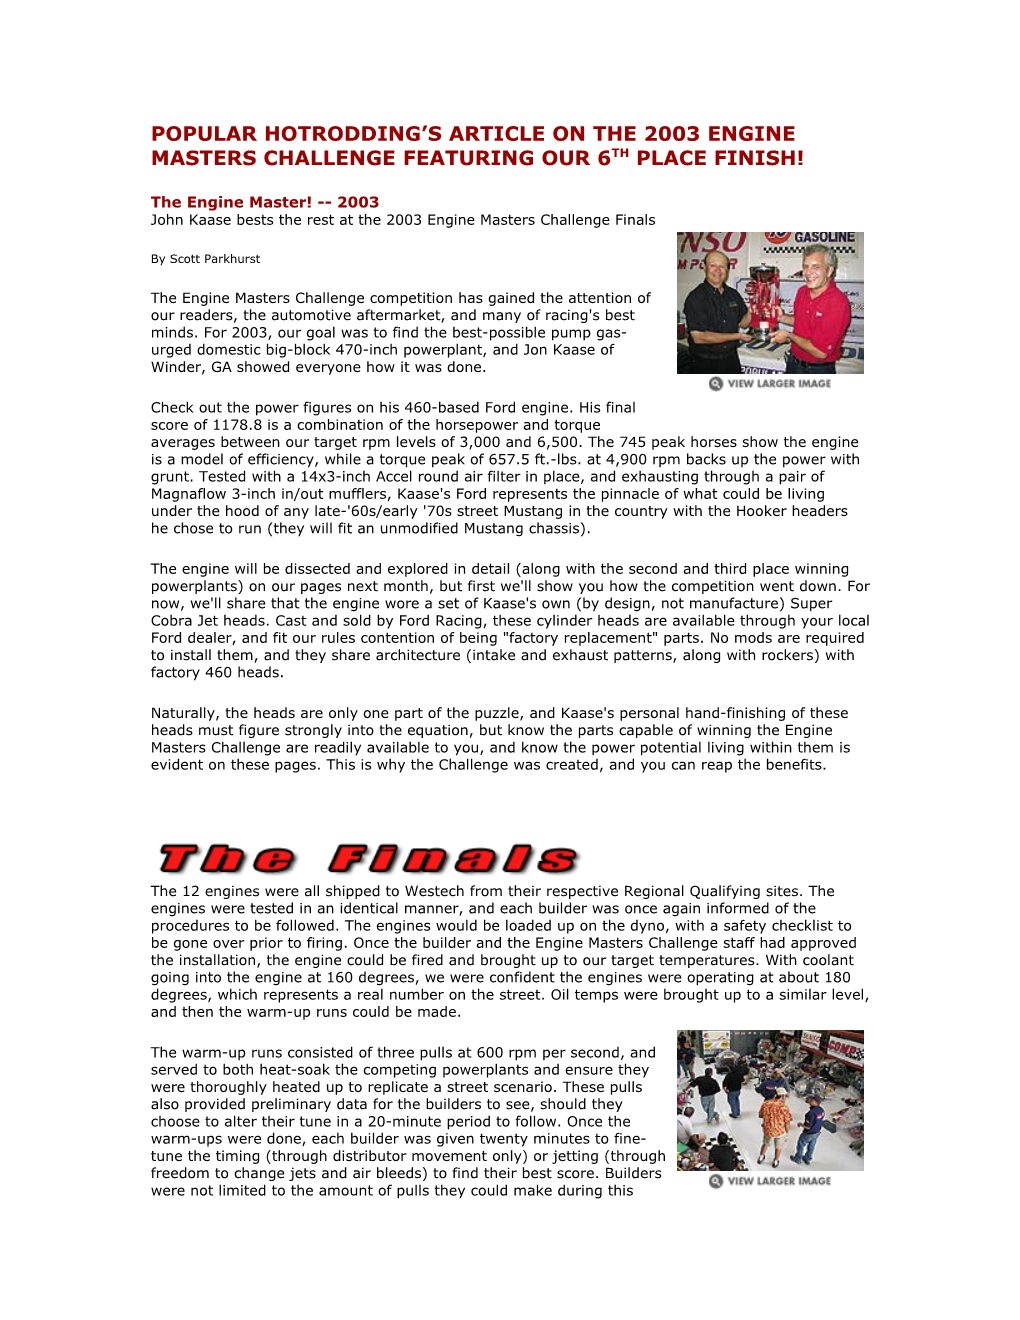 Popular Hotrodding S Article on the 2003 Engine Masters Challenge Featuring Our 6Th Place Finish